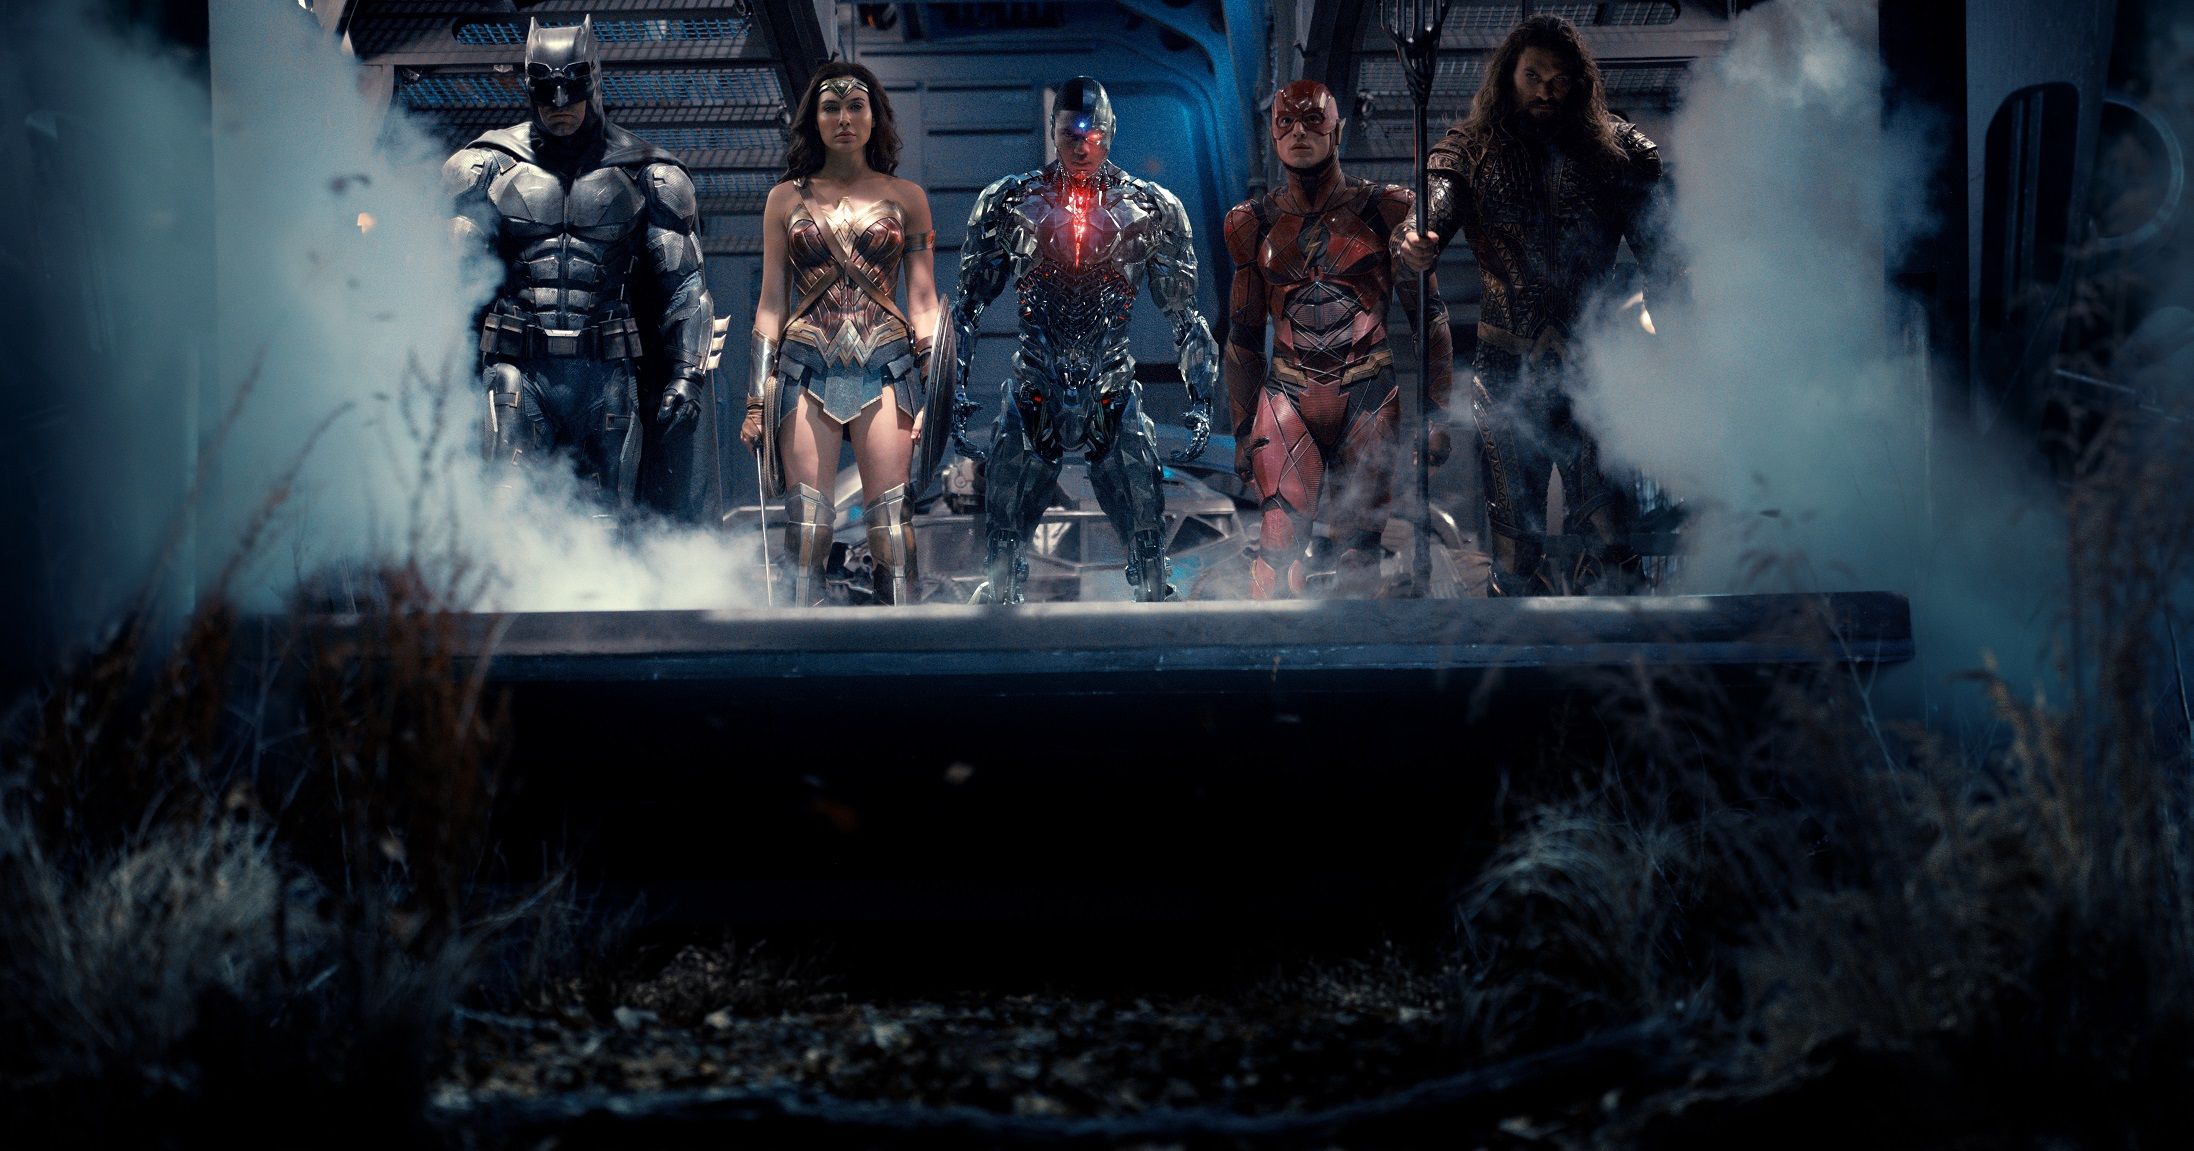 Breaking News: Zack Snyder's Justice League Cut is Coming to HBO Max